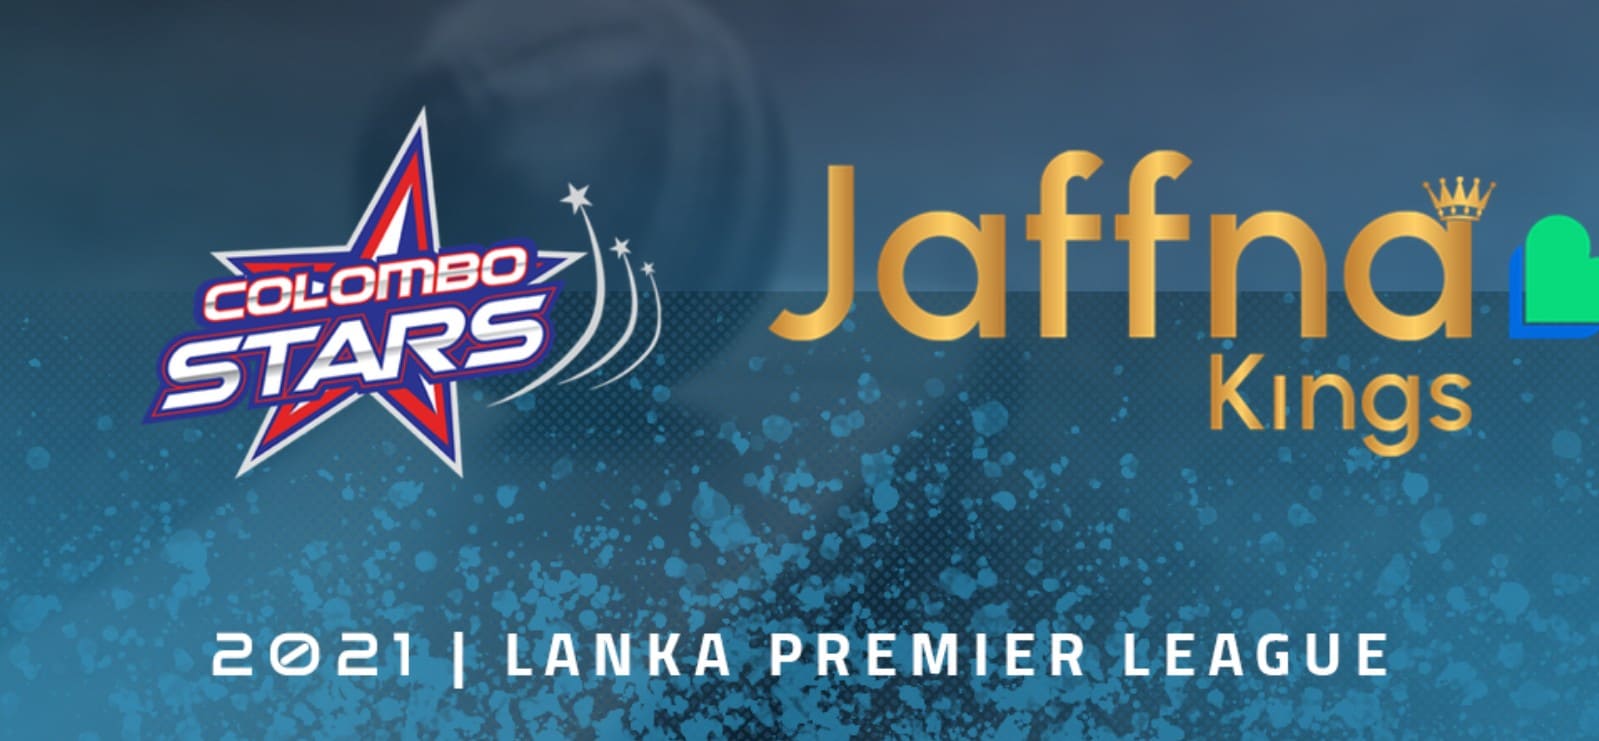 Lanka Premier League: Preview, Squad News, Head to Head stats and Dream11 Prediction for Jaffna Kings vs Colombo Stars